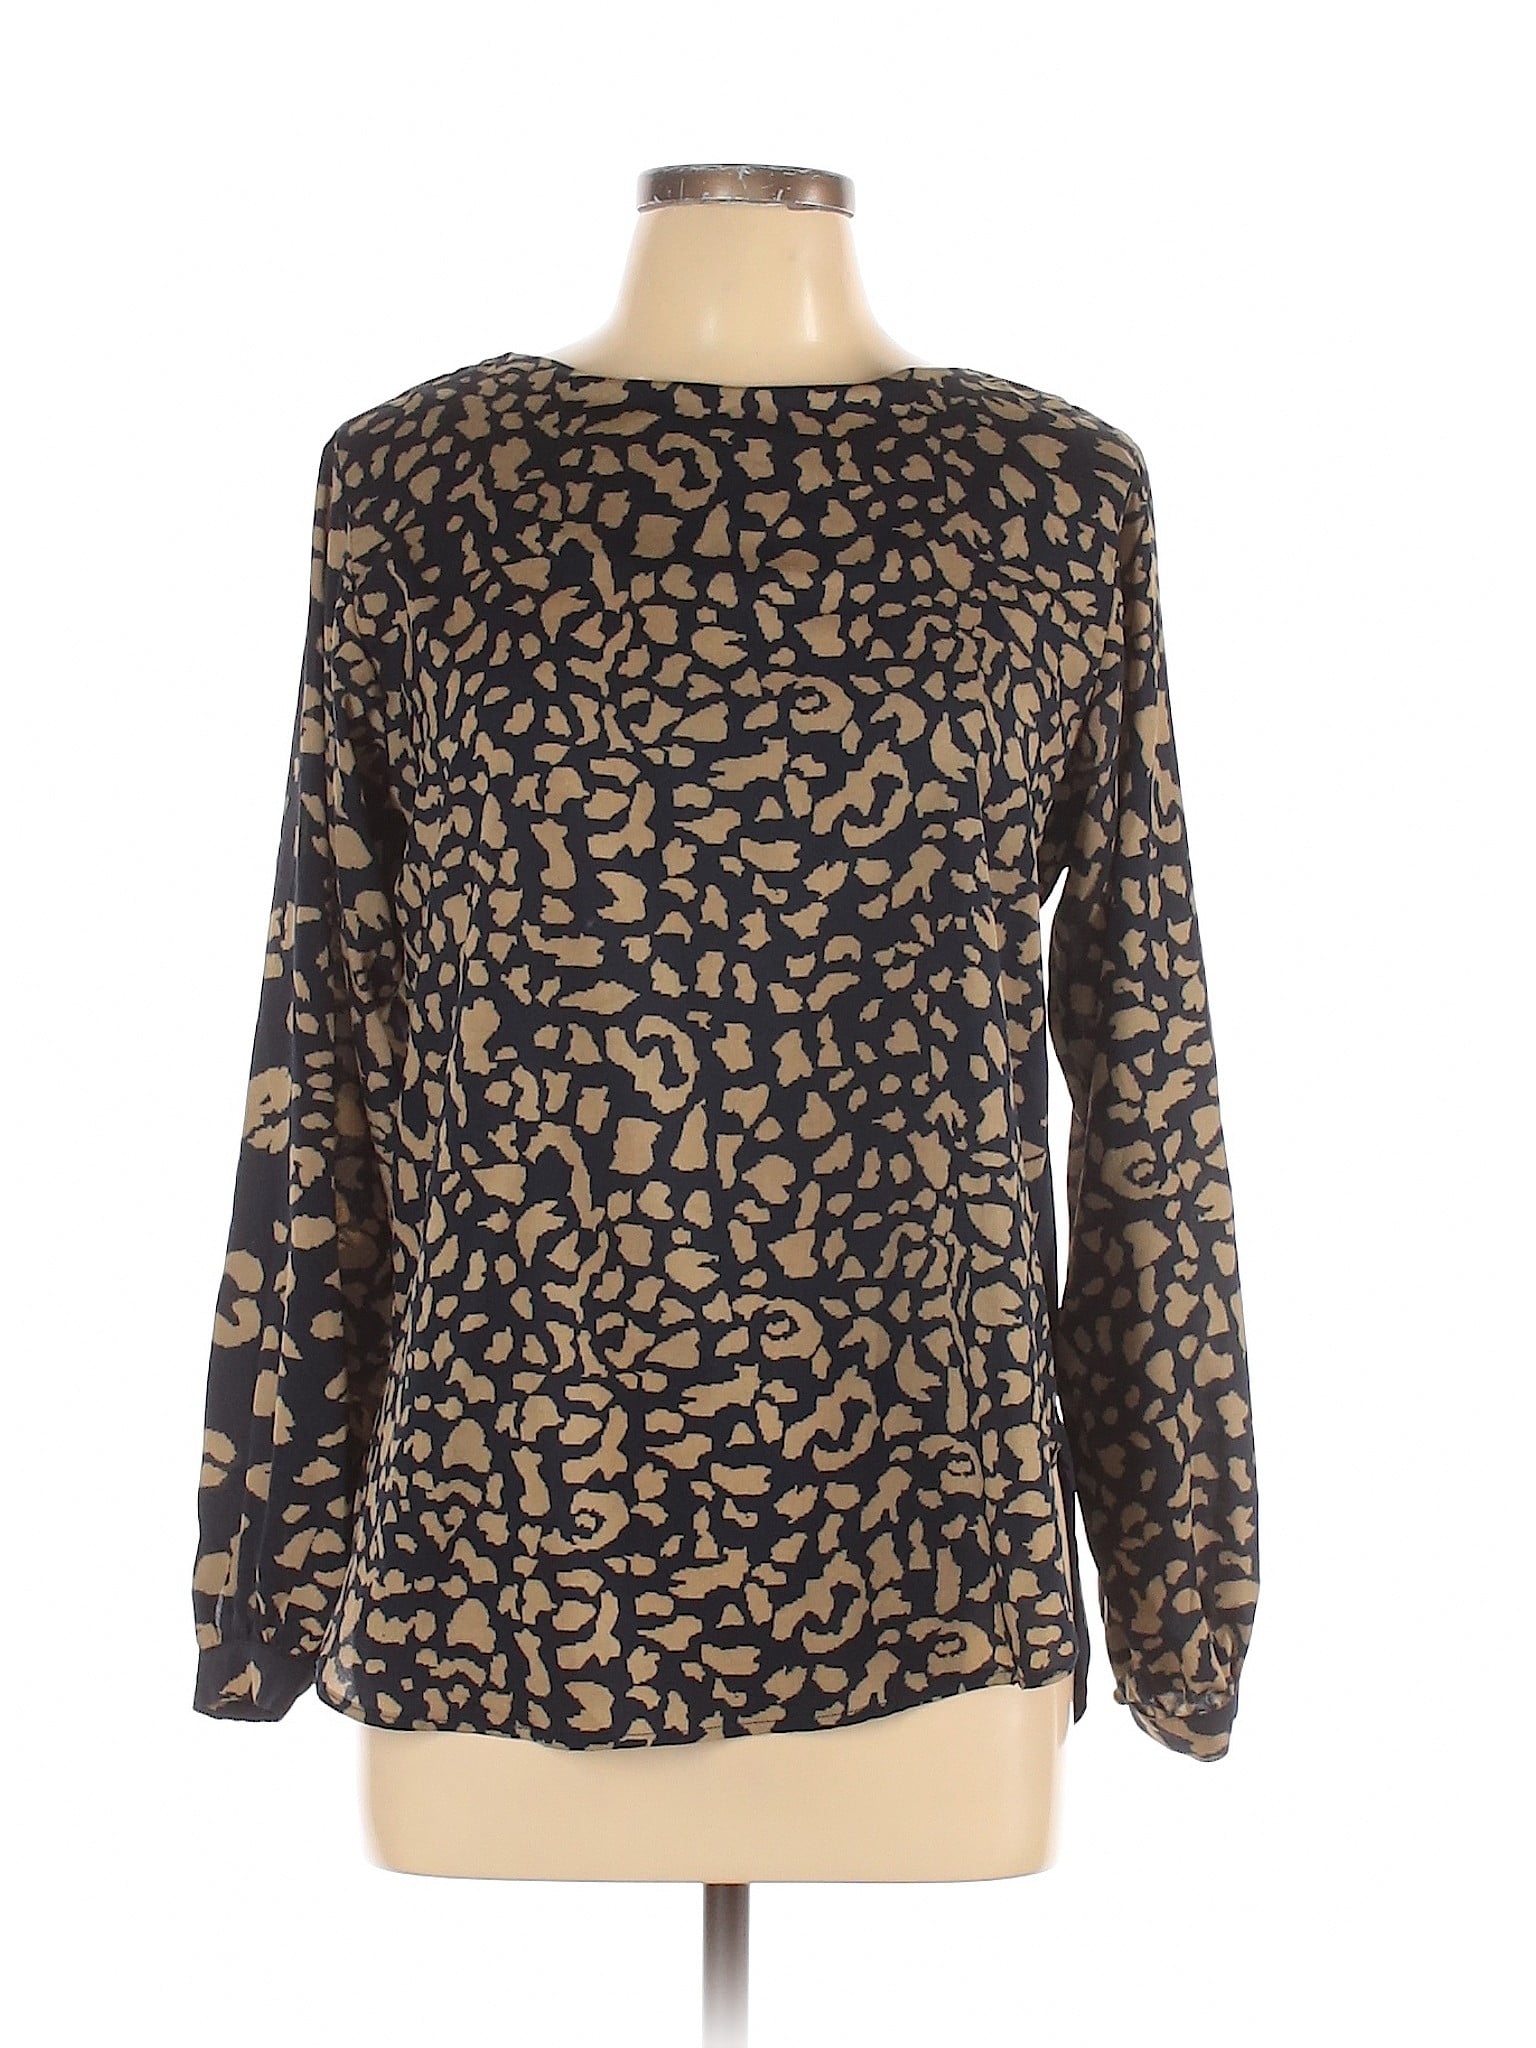 Veronica M. - Pre-Owned Veronica M. Women's Size L Long Sleeve Blouse ...